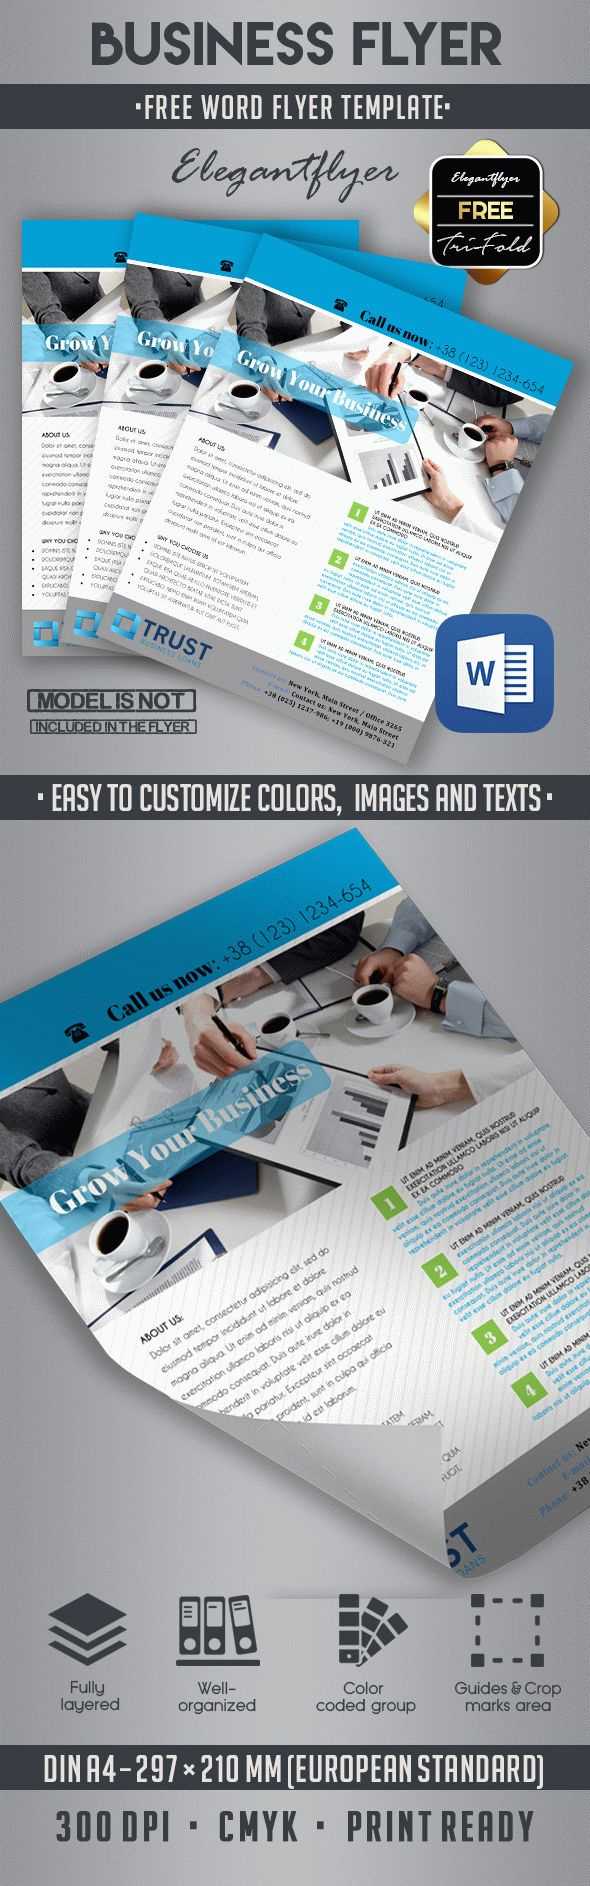 10 Best Business Flyer Templates In Word! |Elegantflyer Within Free Business Flyer Templates For Microsoft Word